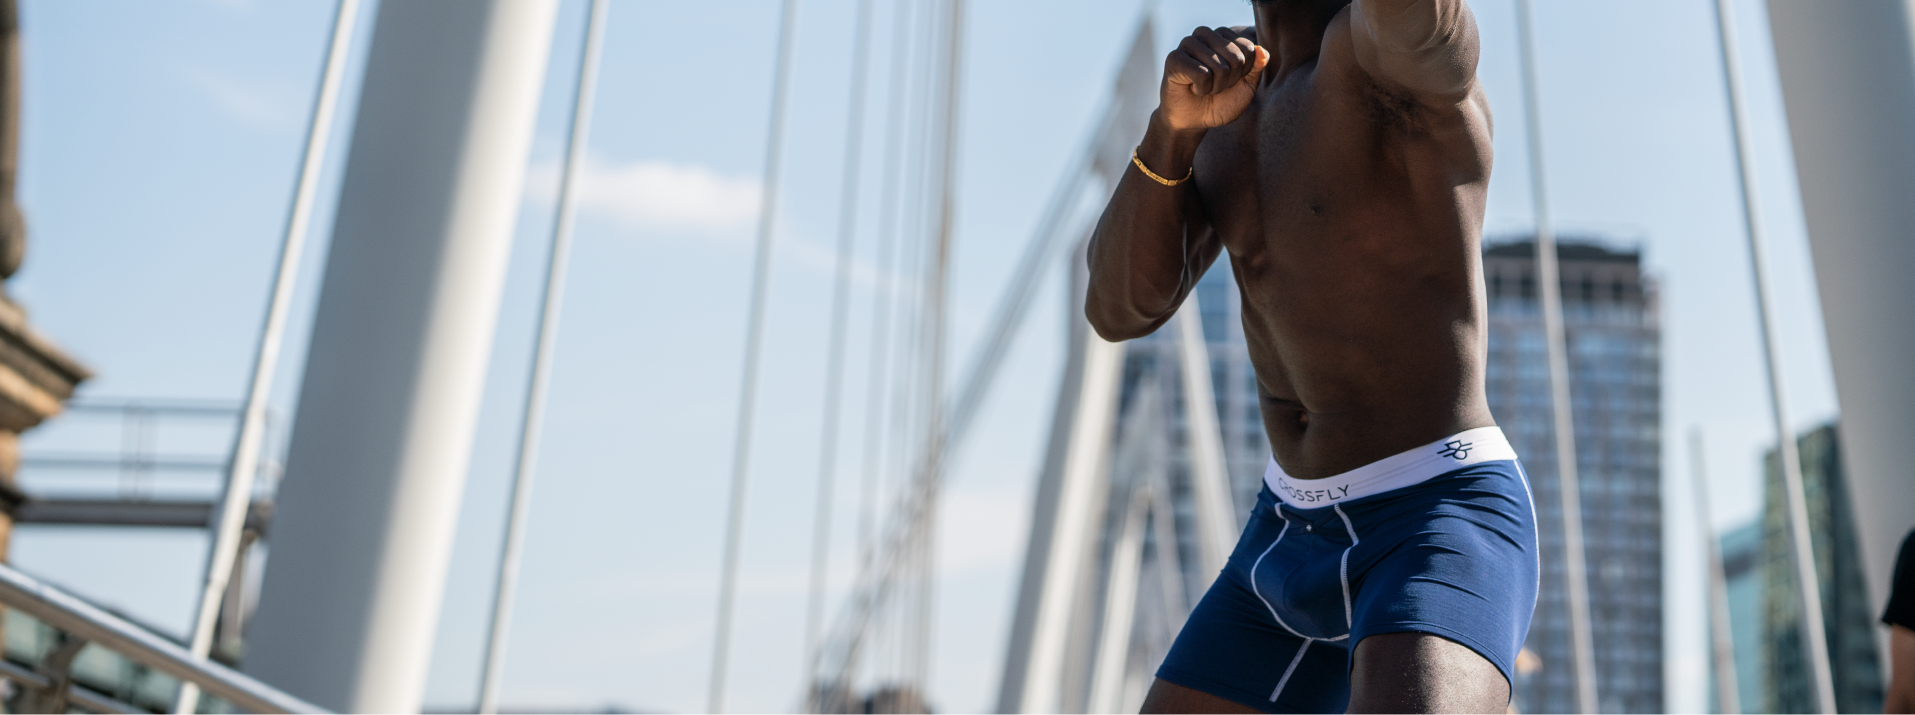 The Most Comfortable Underwear for Men